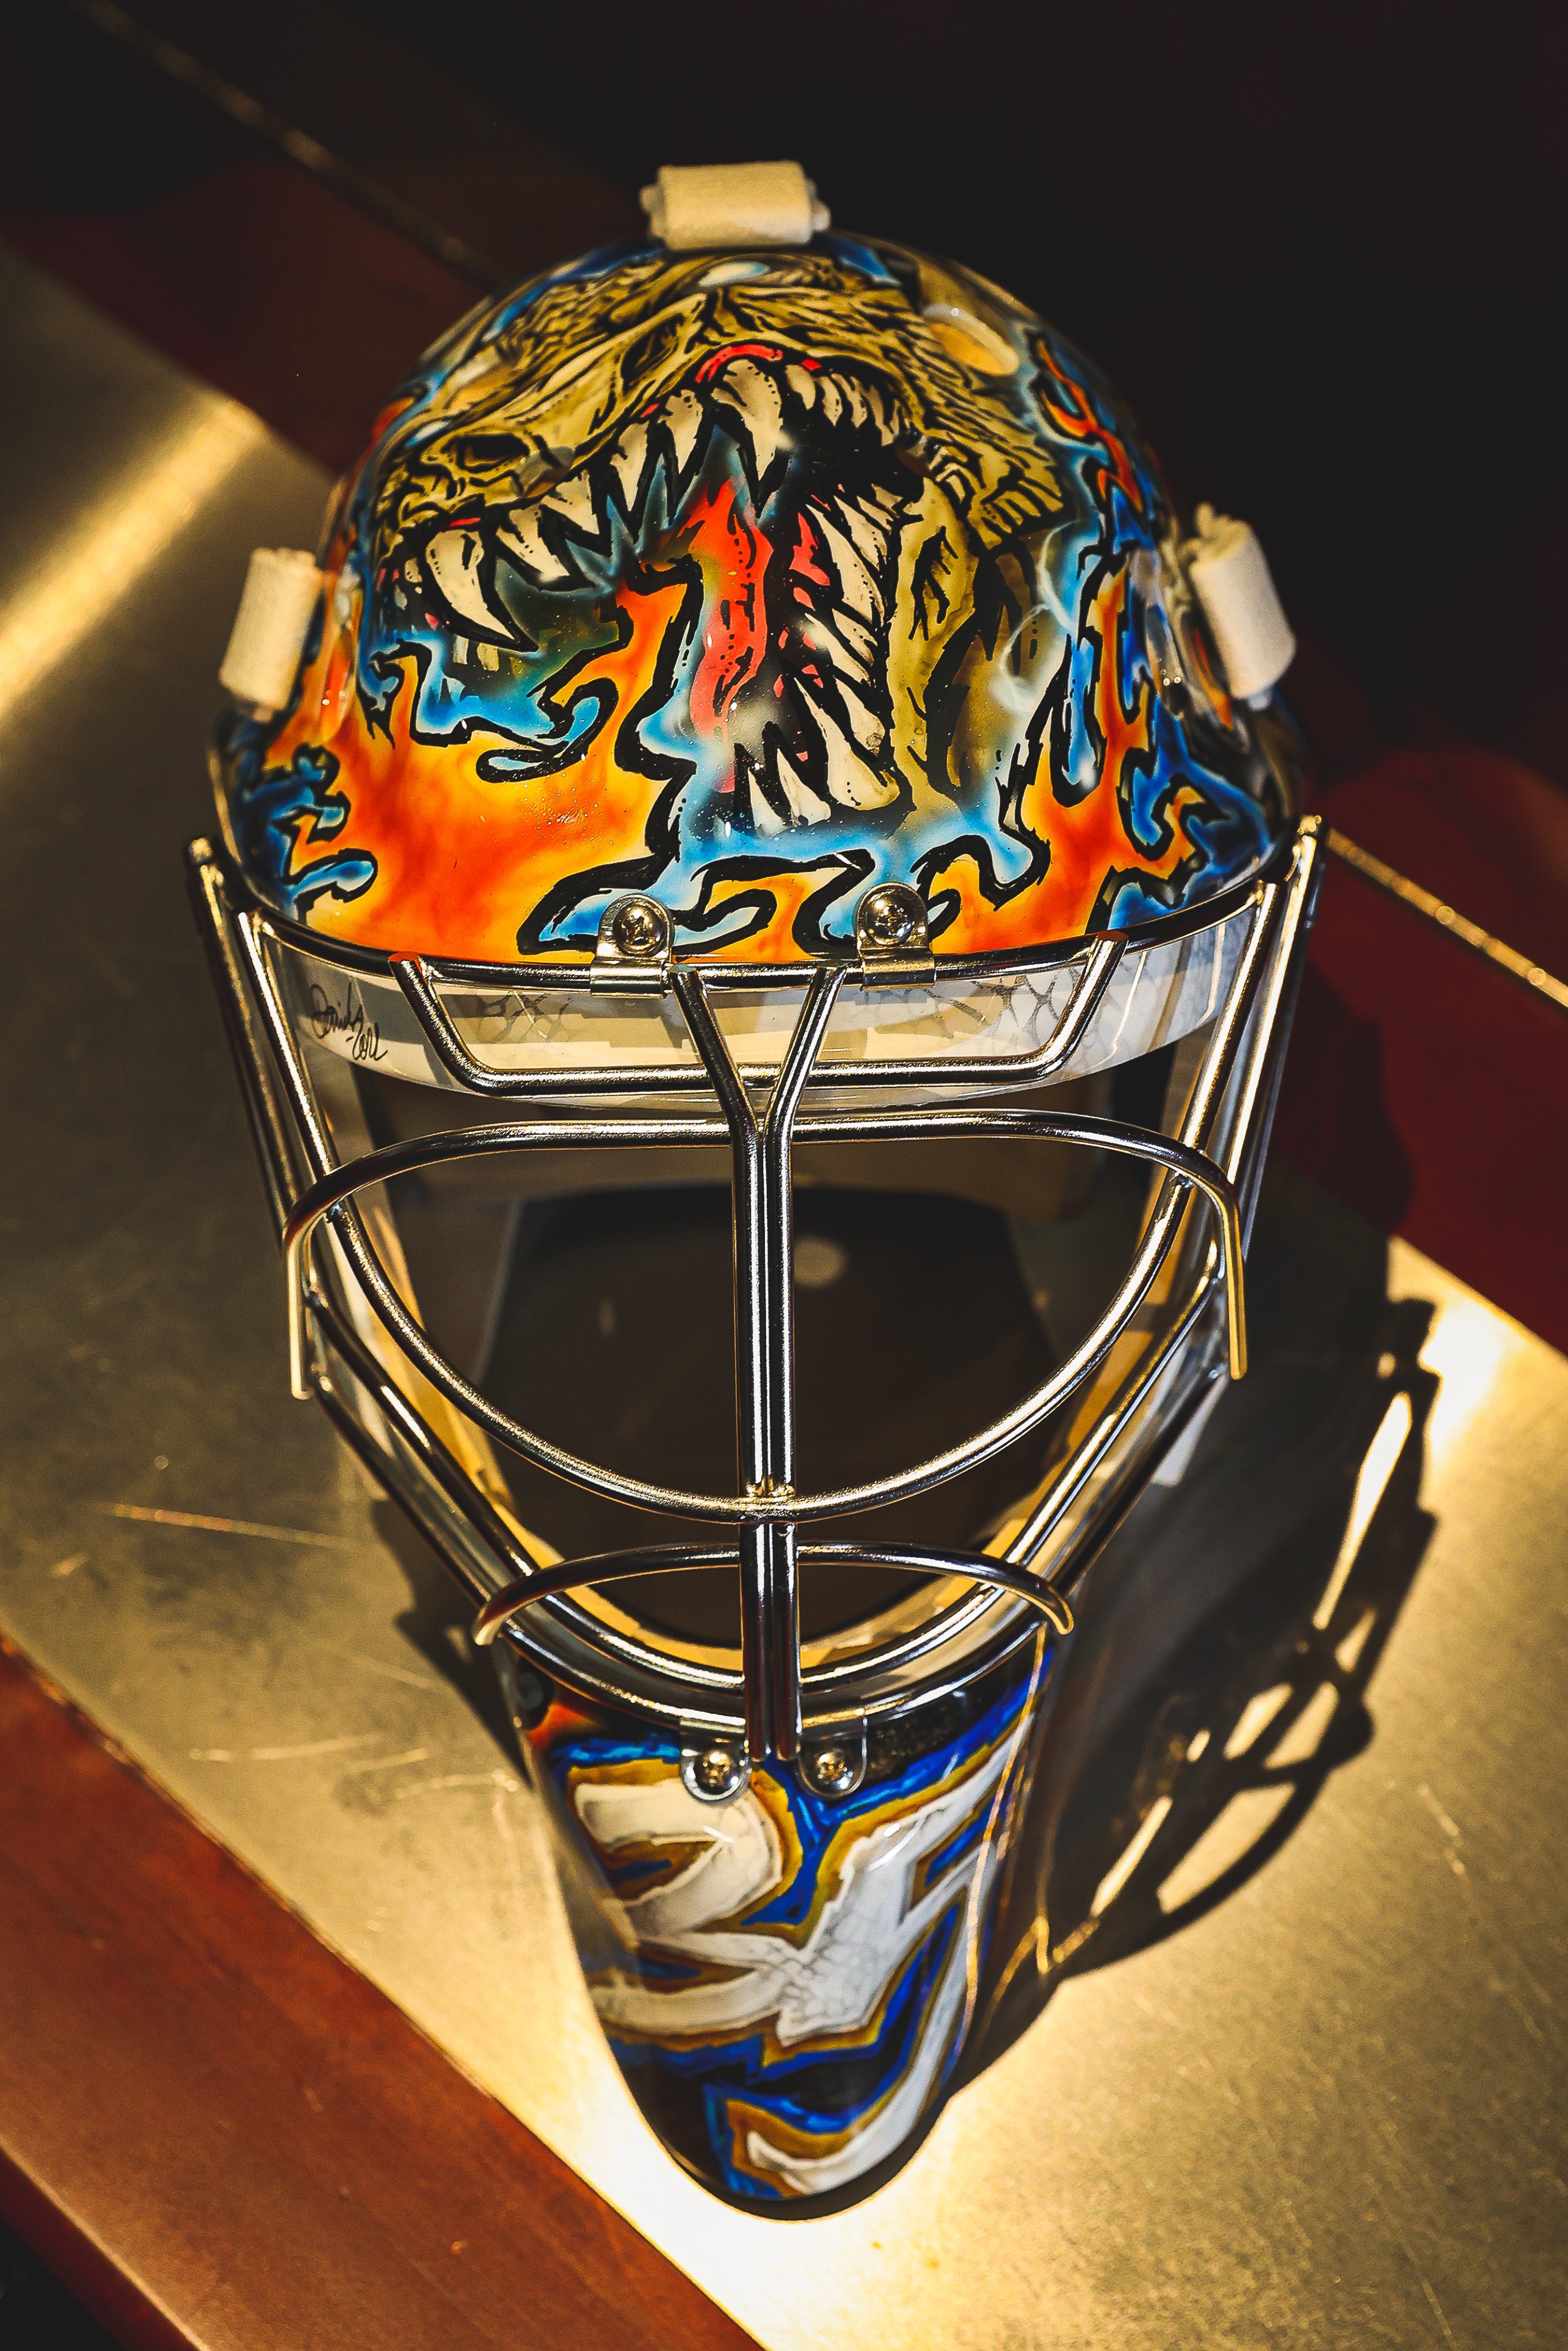 A detail view of Darcy Kuemper of the Washington Capitals mask